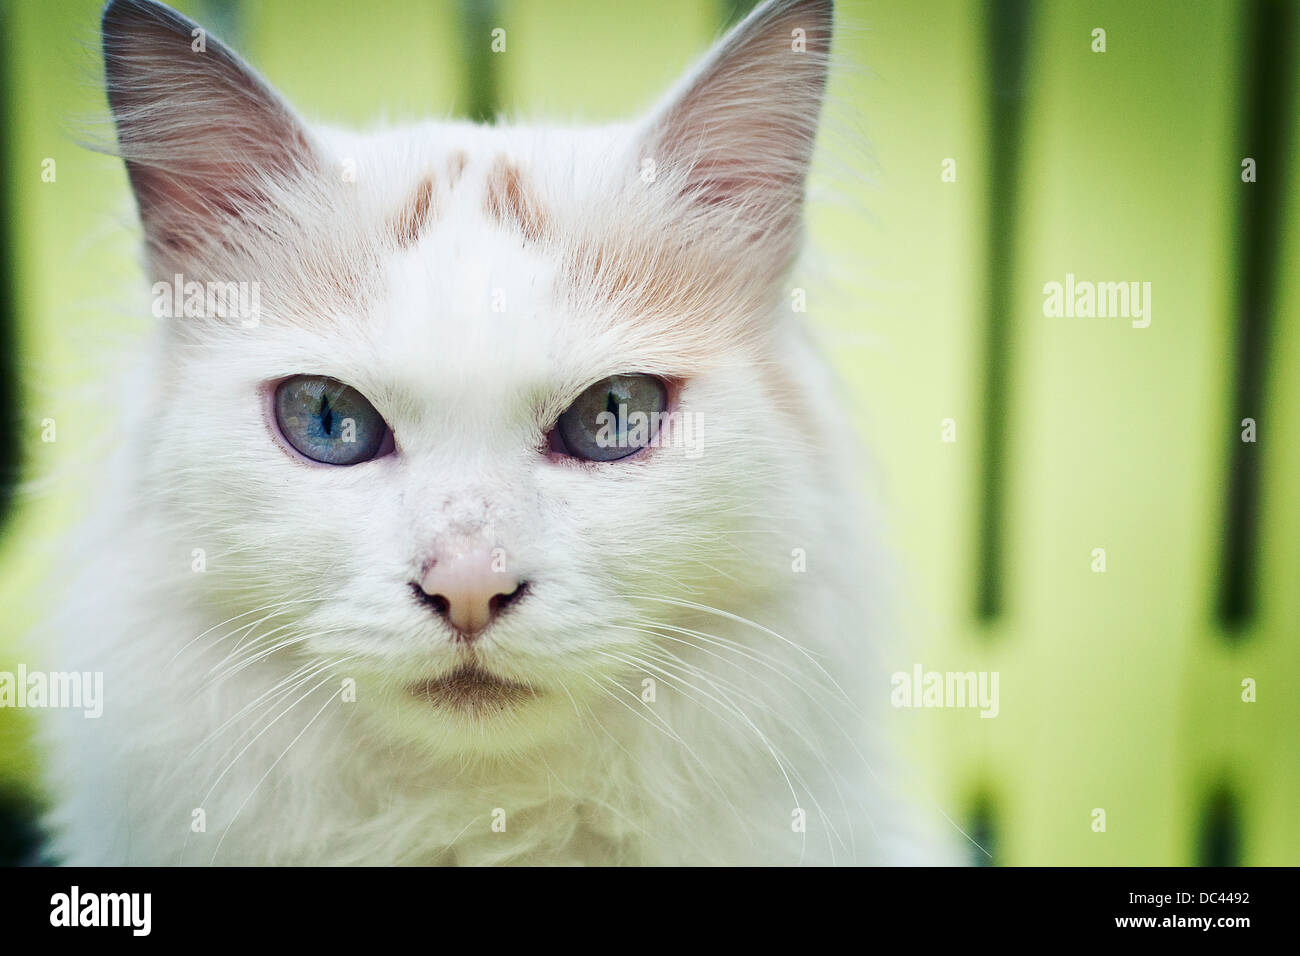 A long haired white cat with piercing blue eyes on a green background Stock Photo